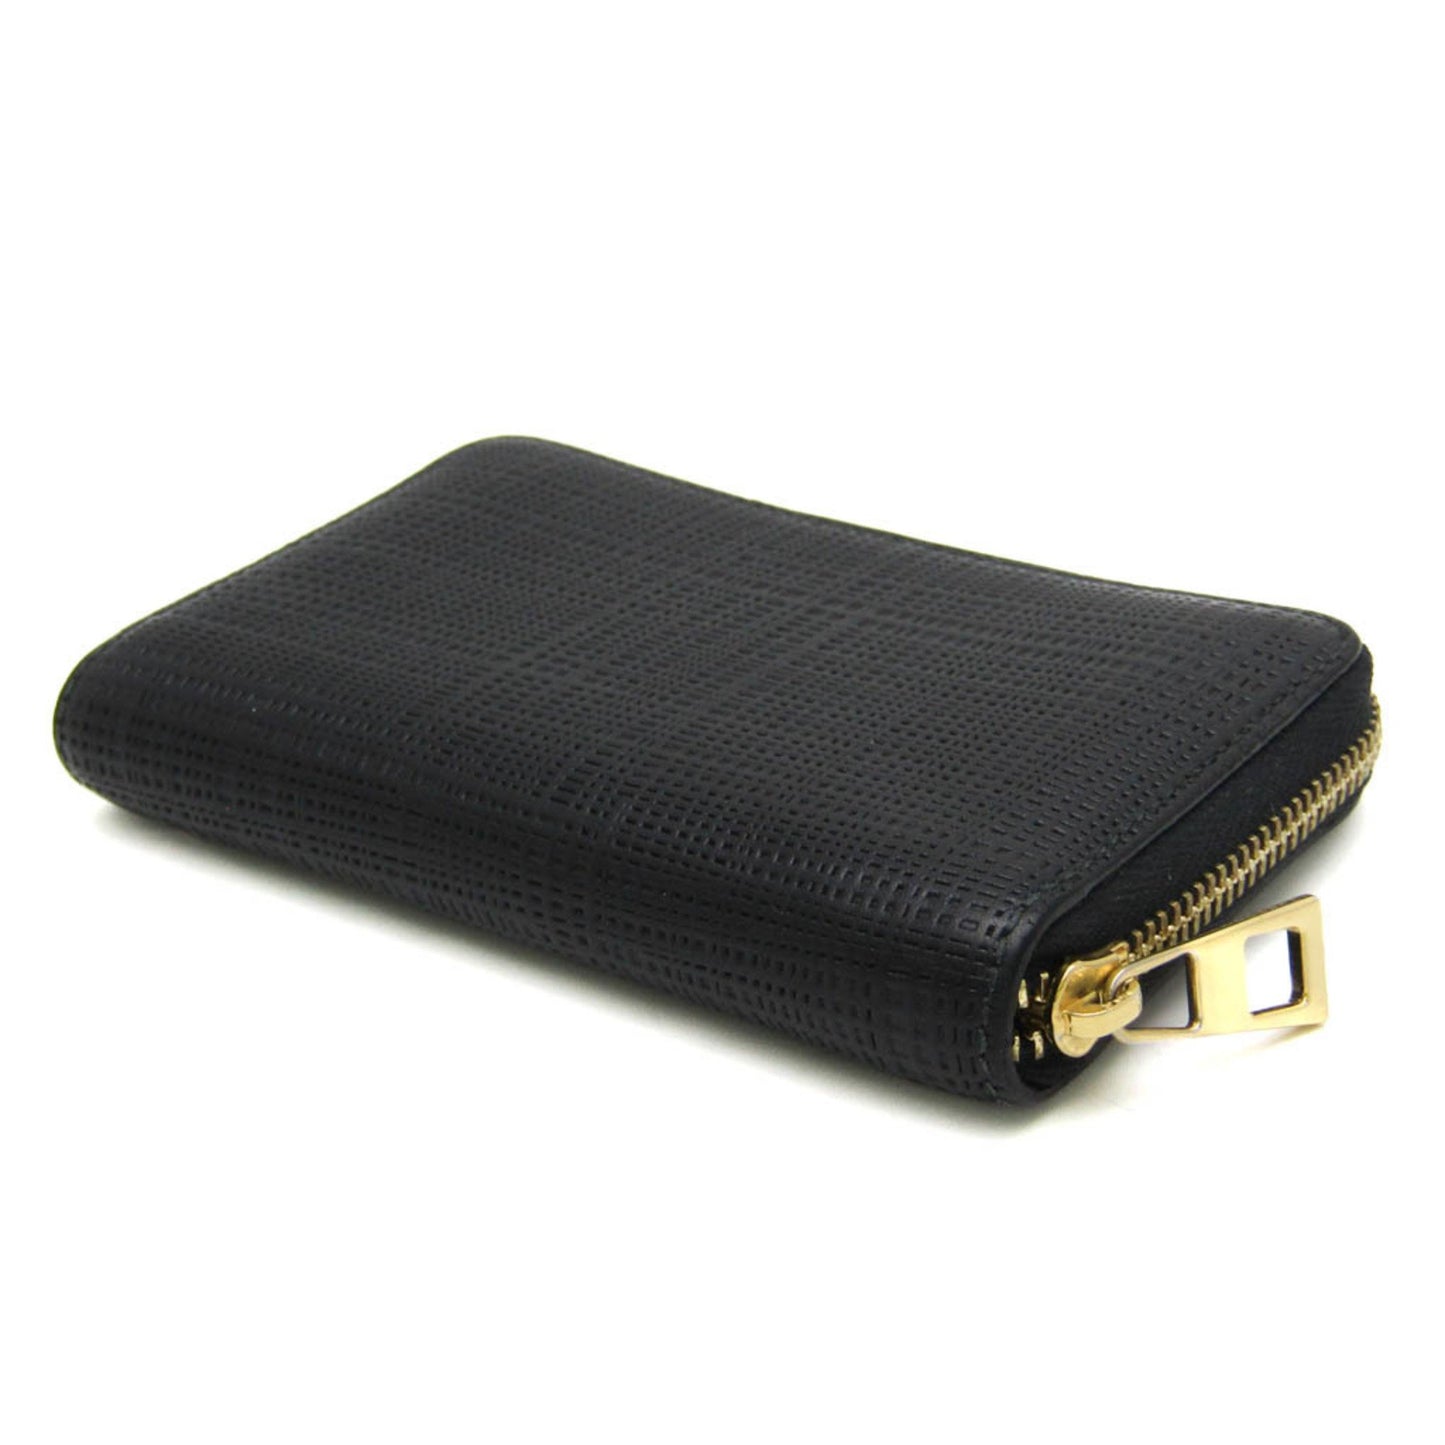 Loewe Women's Leather Wallet with Timeless Design and Excellent Condition in Black